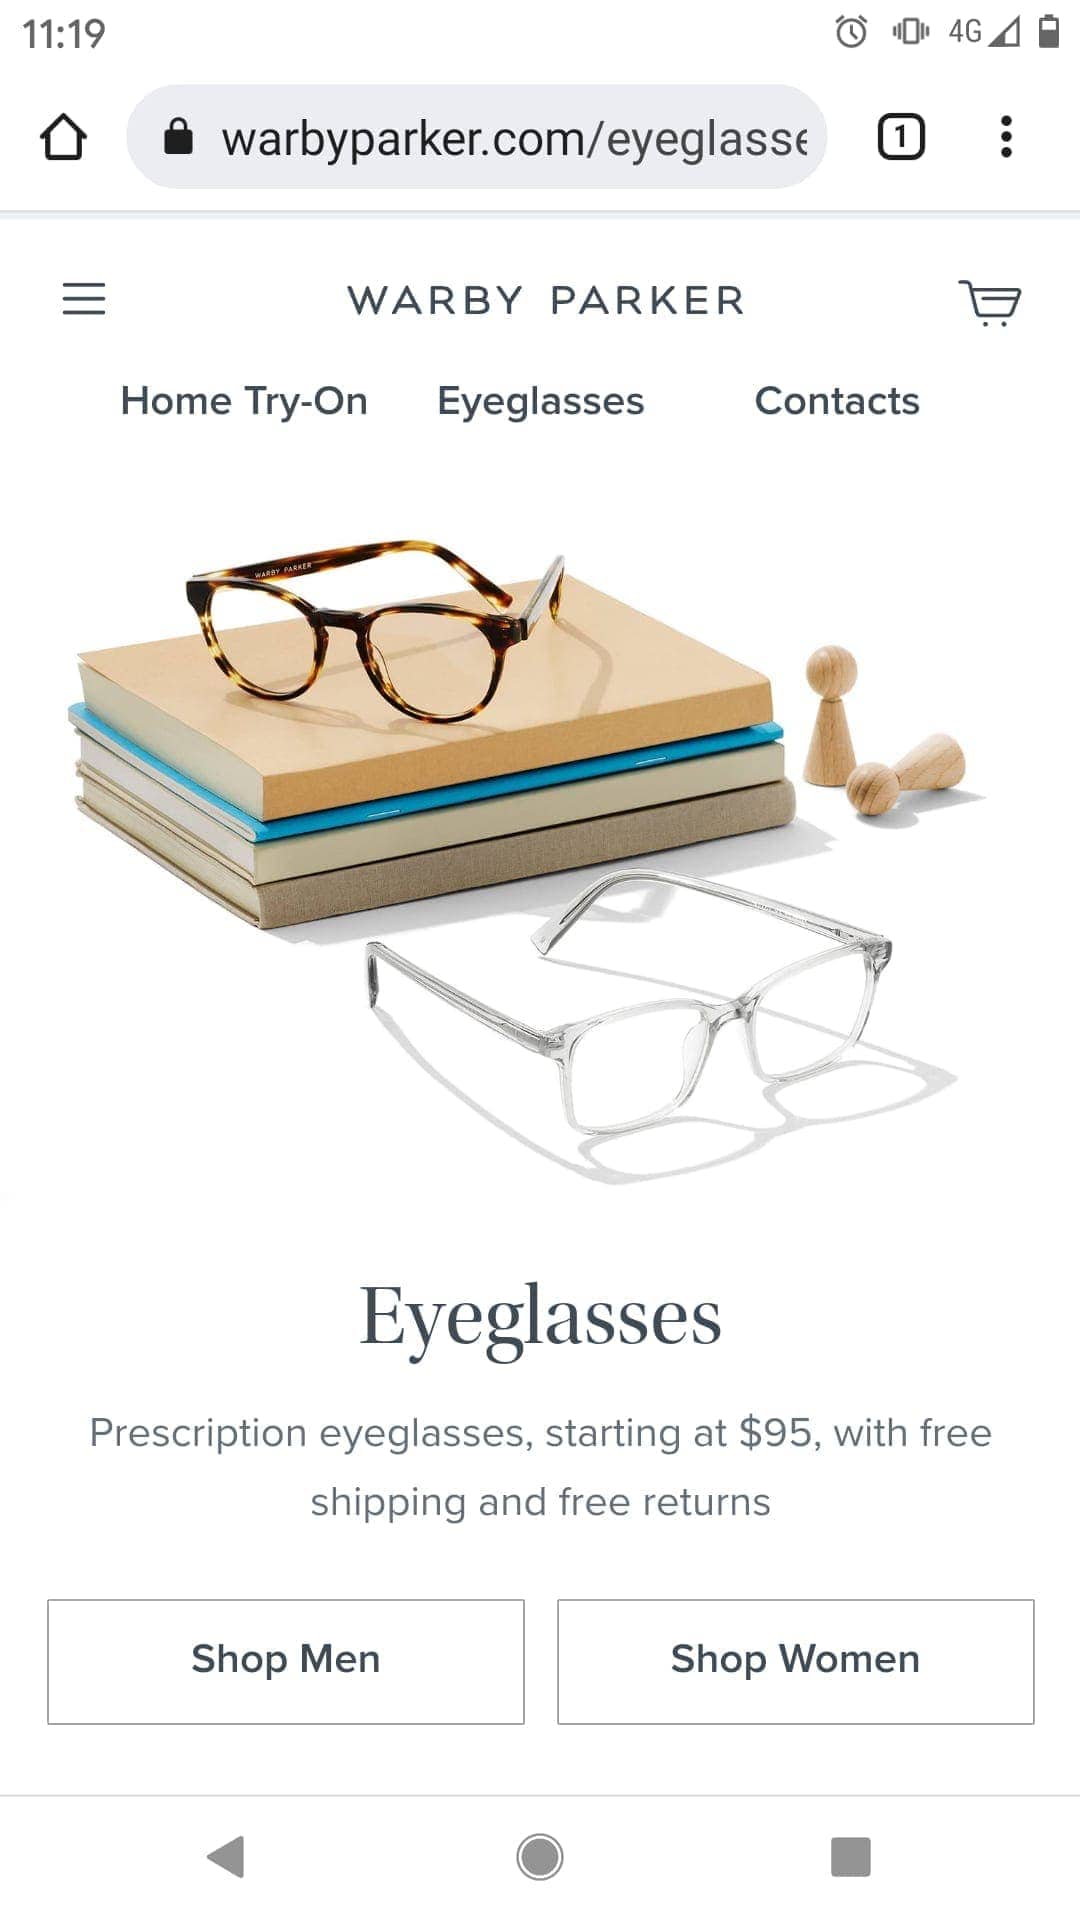 The eyeglasses page on WarbyParker.com